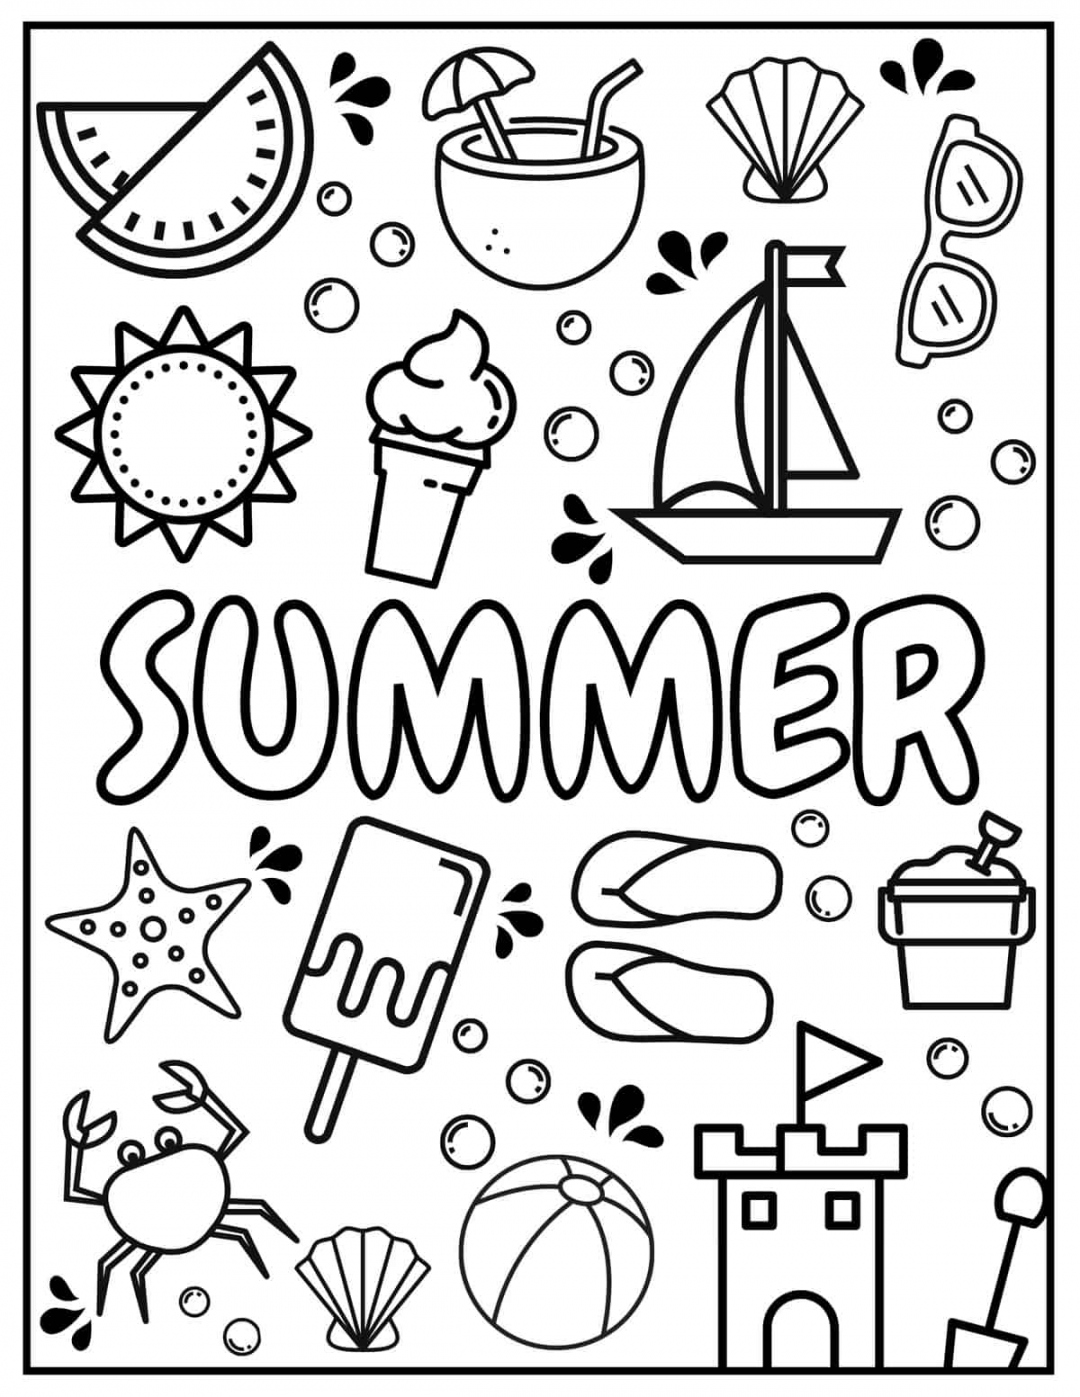 Free Printable Summer Coloring Pages - Printable -  Free Summer Coloring Pages for Kids - Prudent Penny Pincher